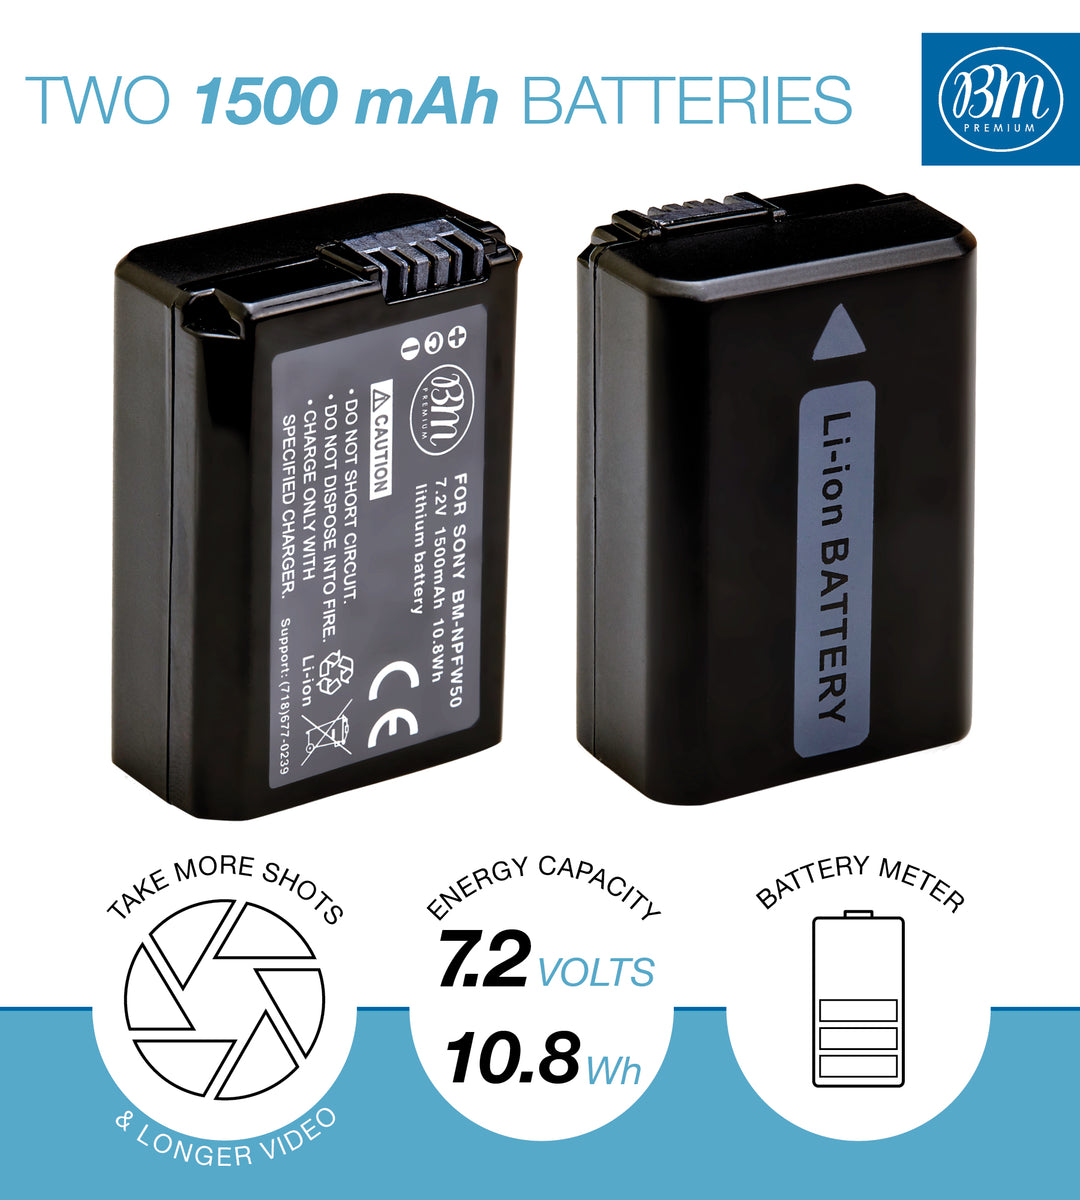 Digital NP-FW50 Lithium-Ion Rechargeable Battery Pack for